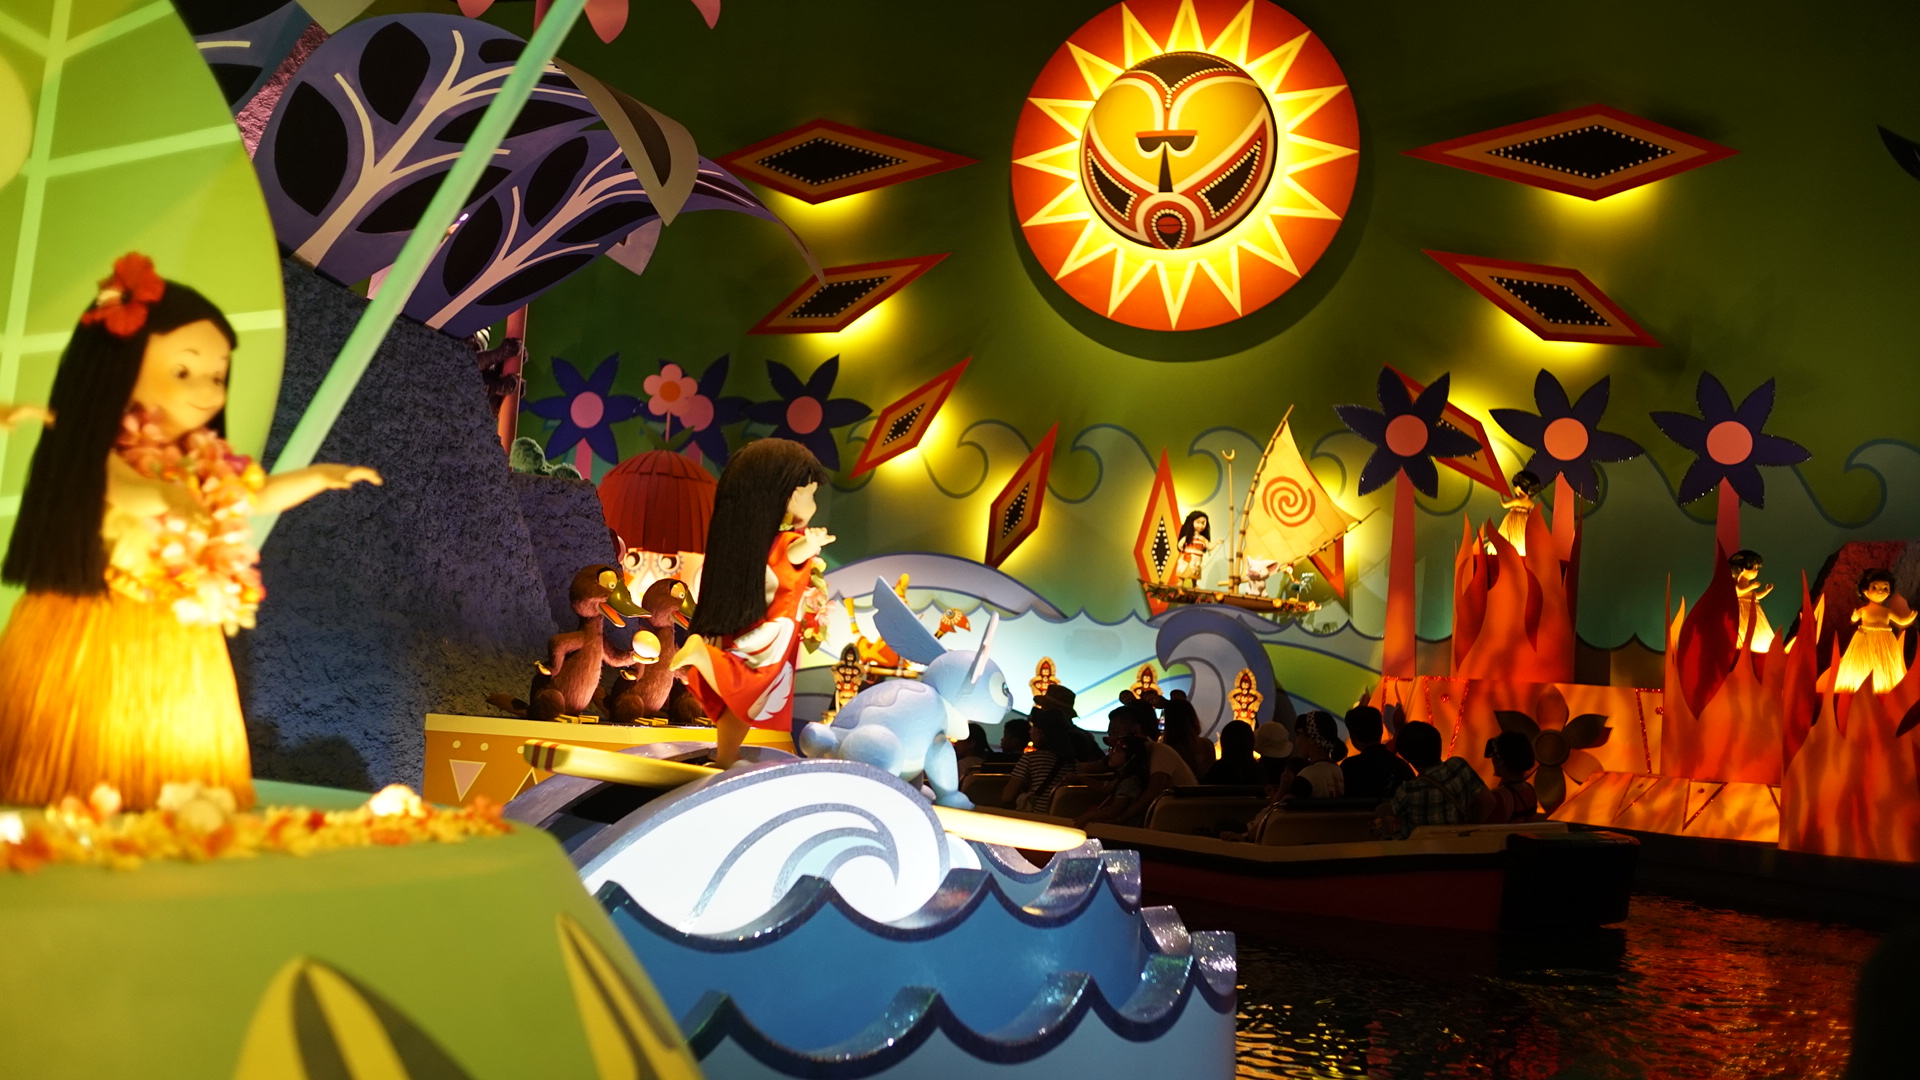 Lilo and Stitch, Moana, Pua, and Hei Hei appear in the Polynesian scene in "it's a small world" at Tokyo Disneyland.